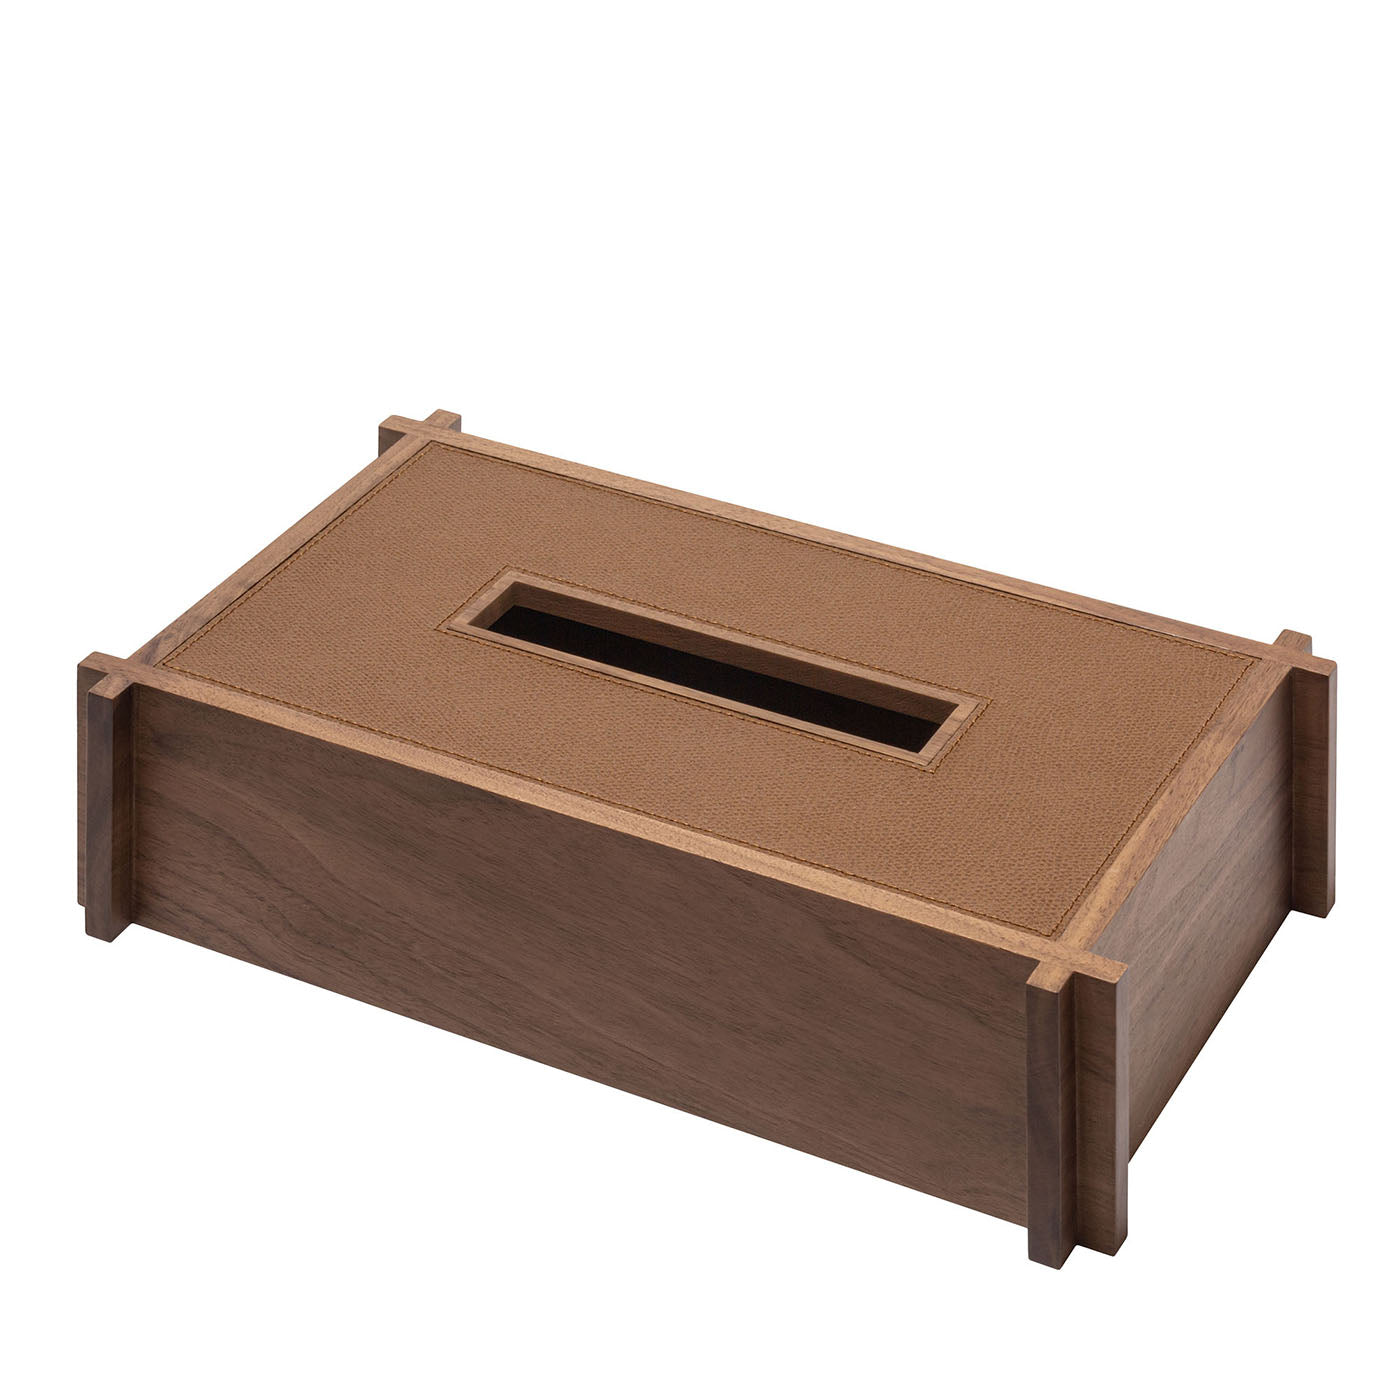 Structura Leather & Wood Rectangular Tissue Holder #1 - Main view